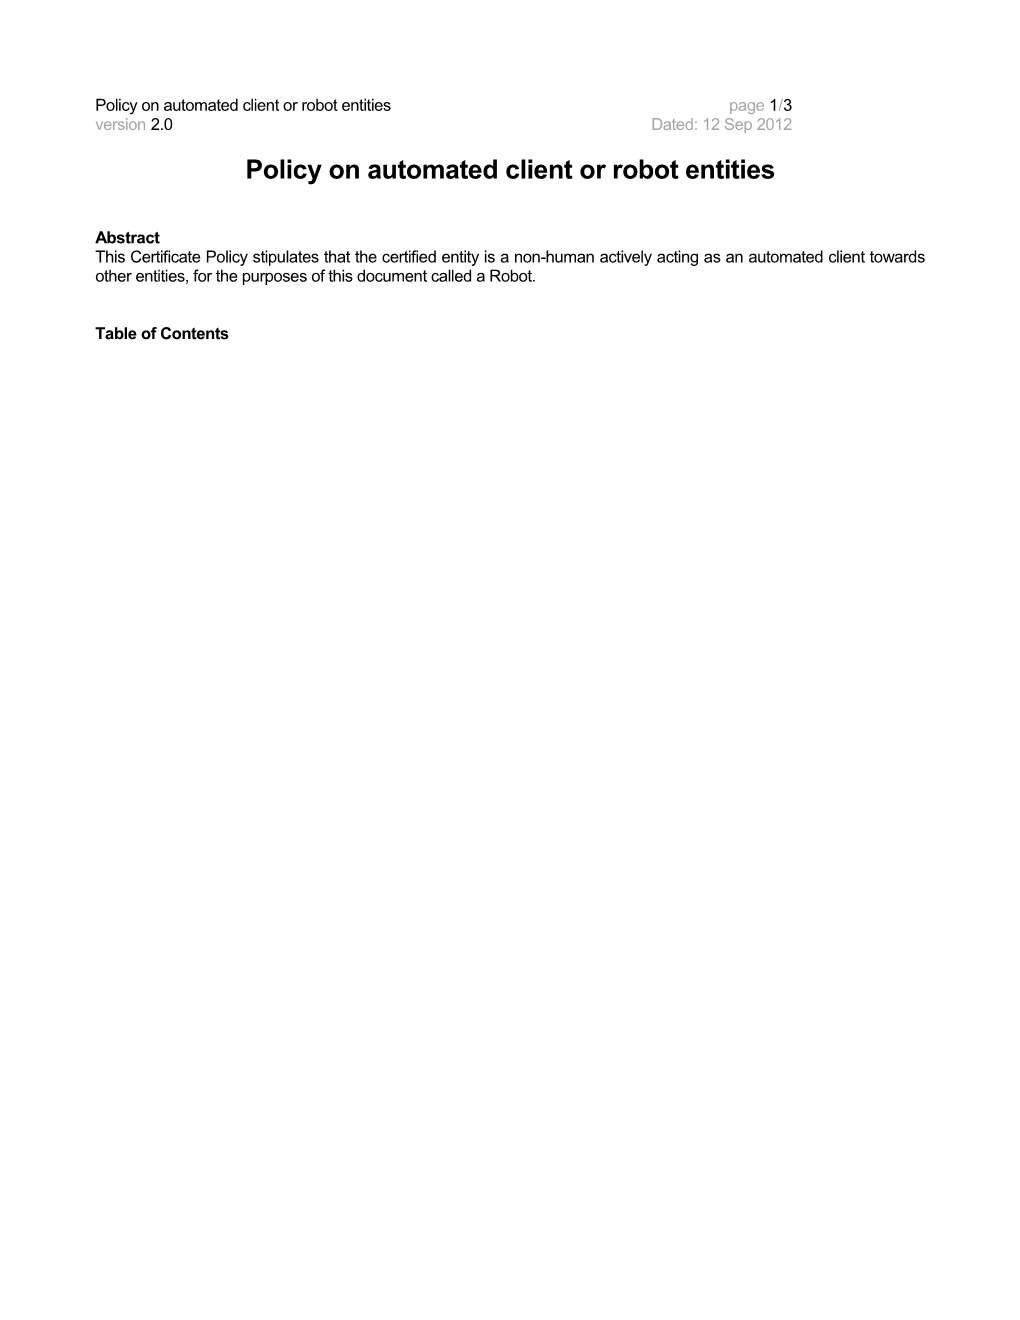 Policy on Automated Client Or Robot Entities